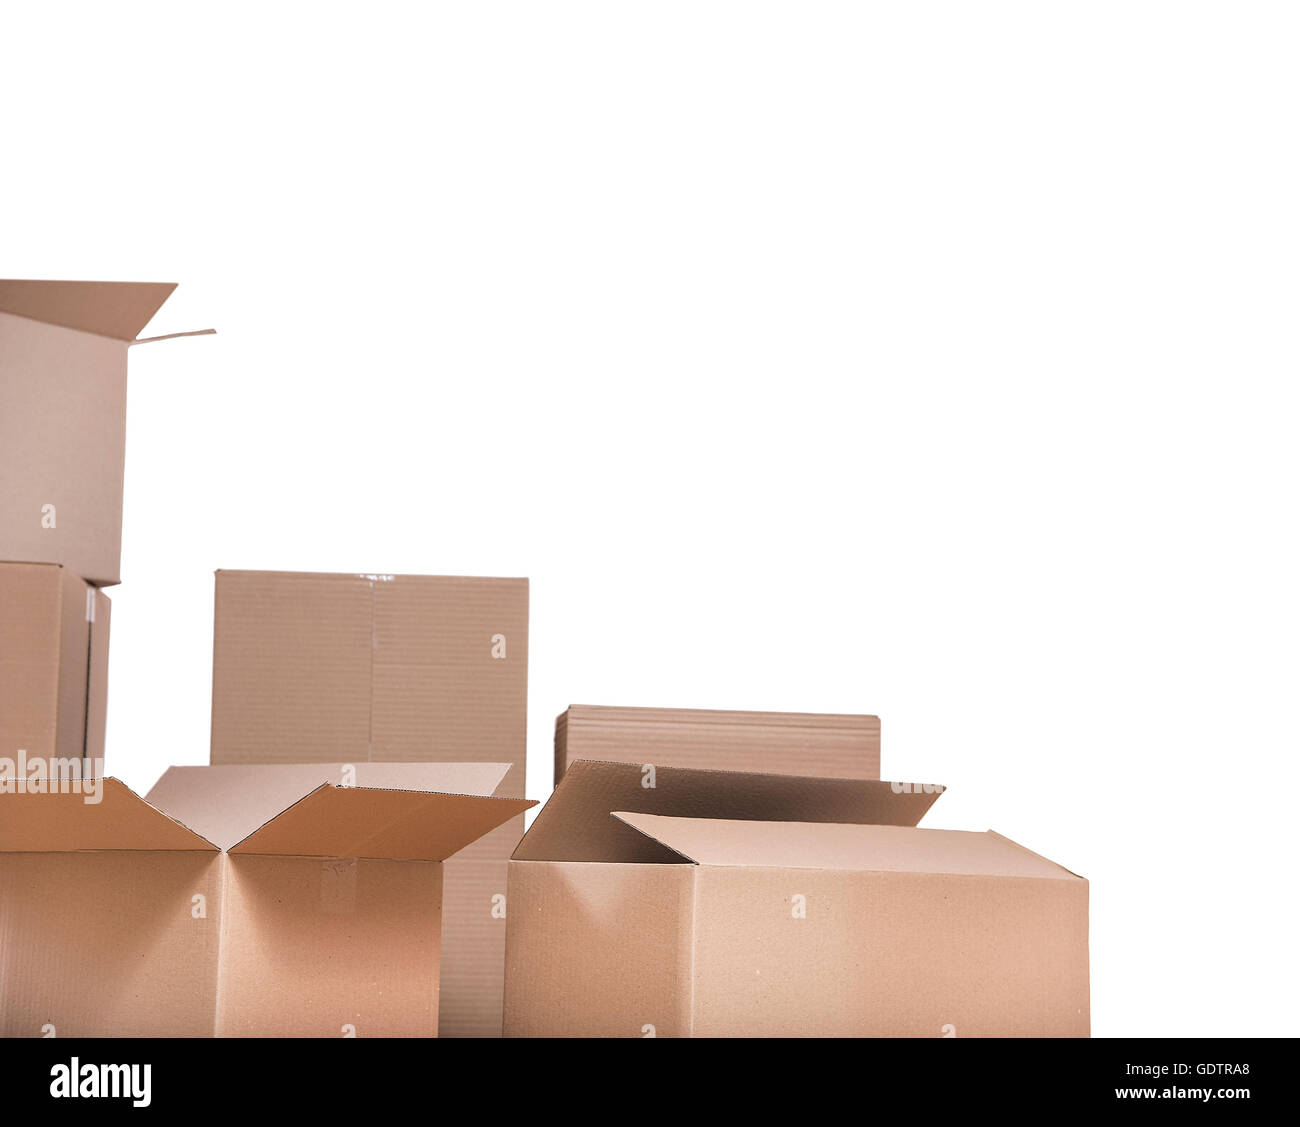 Parts of cardboard boxes partially on white background Stock Photo